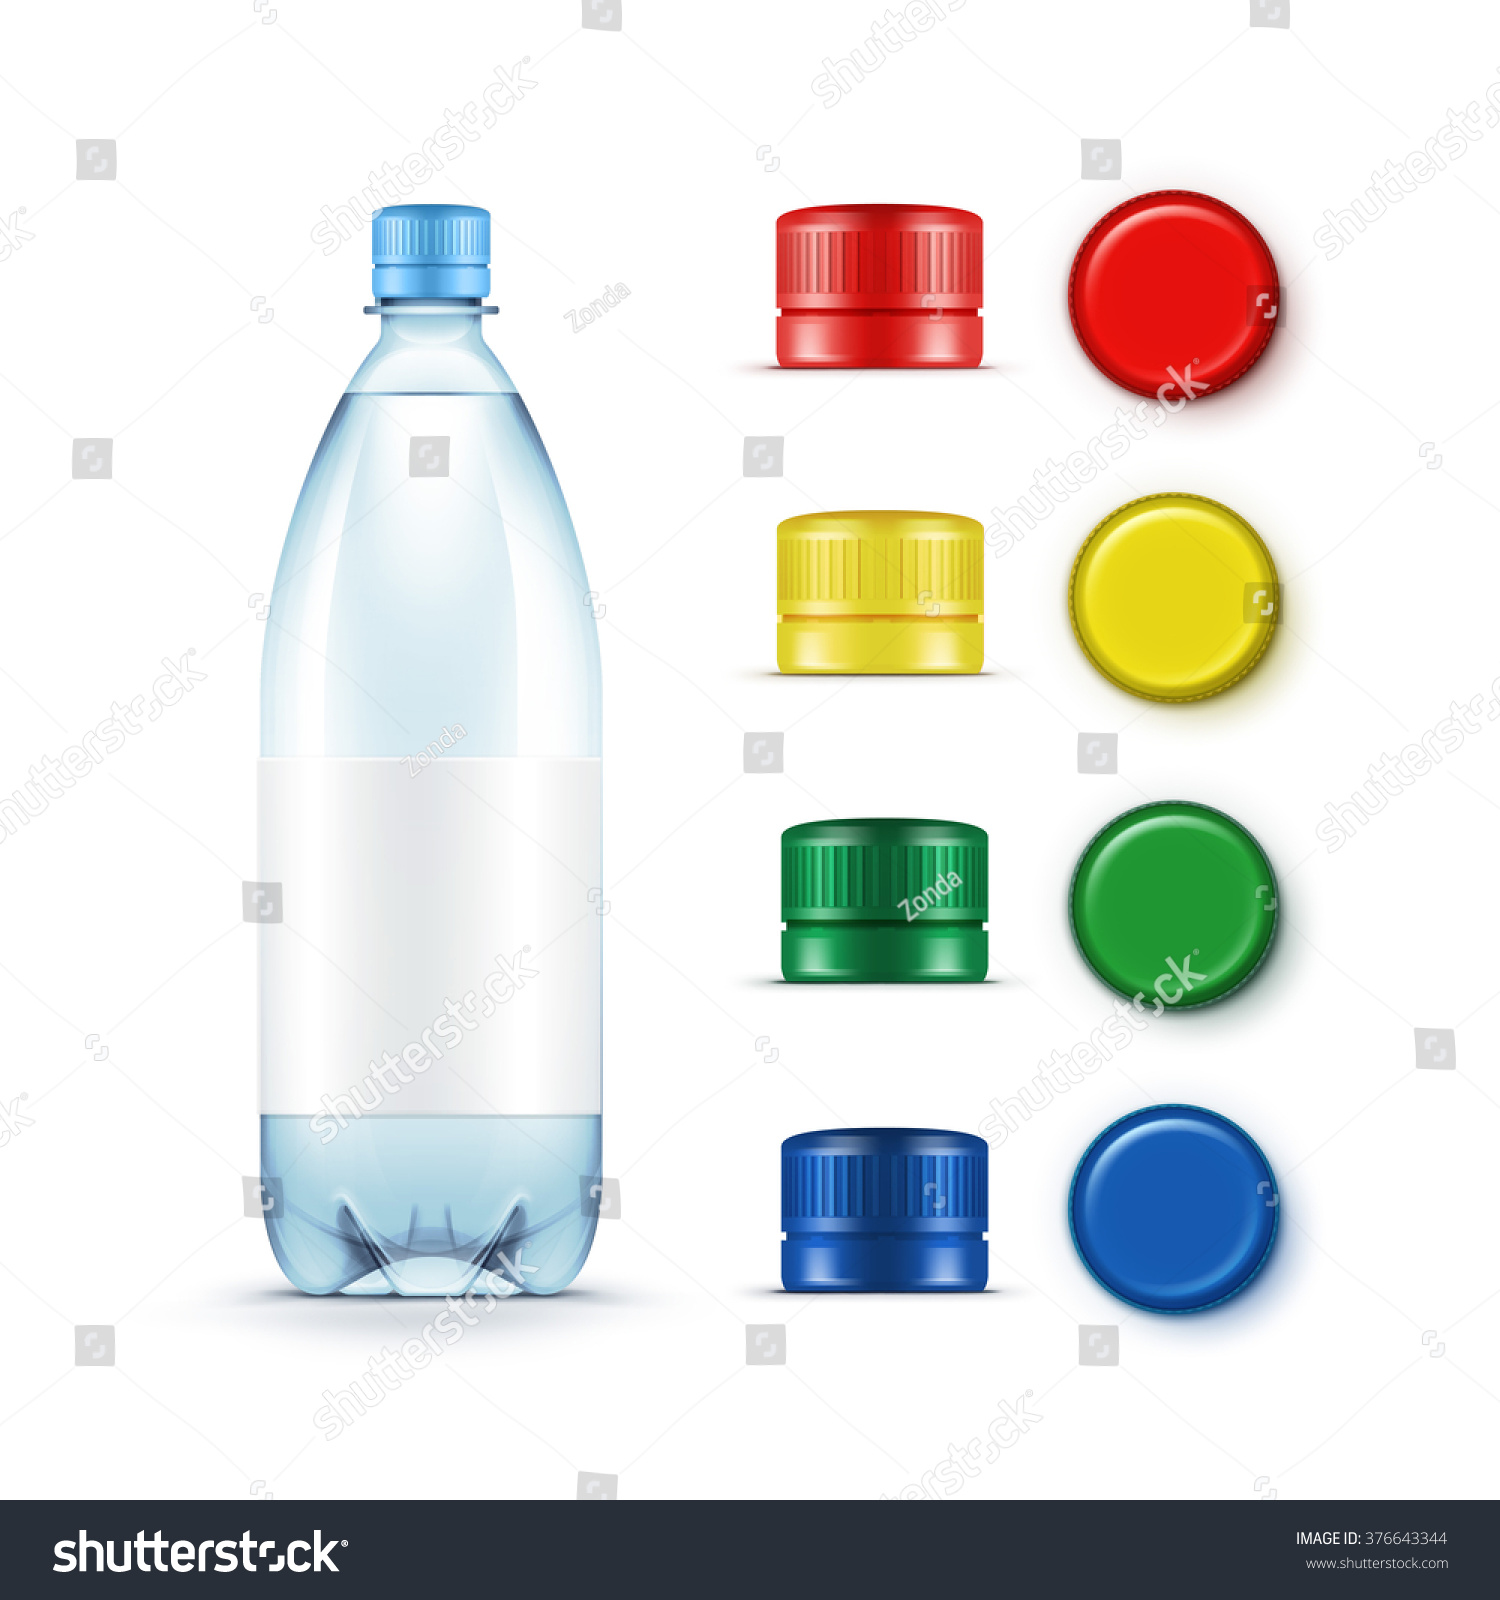 SVG of Vector Blank Plastic Blue Water Bottle with Set of Multicolored Red Yellow Green Caps Isolated on White Background svg